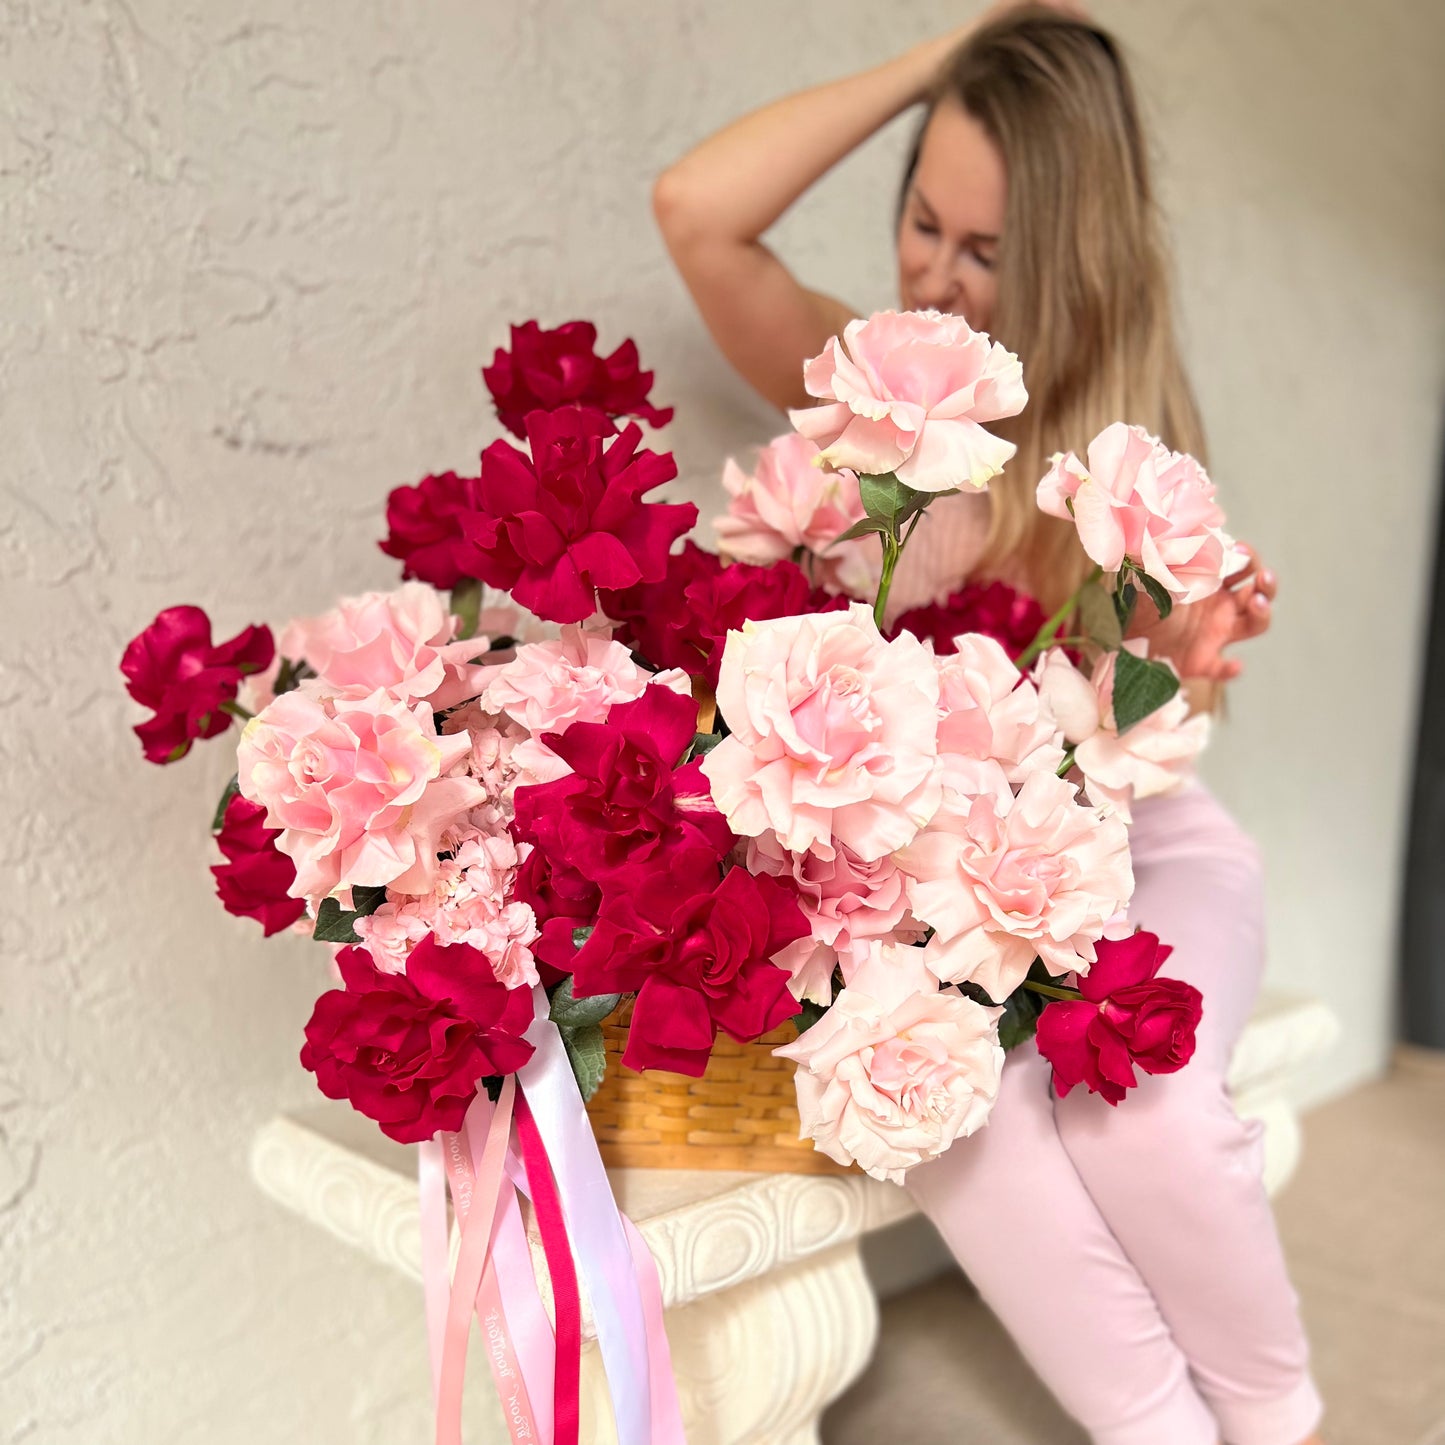 Beautiful bouquet of roses in front of a stunning woman